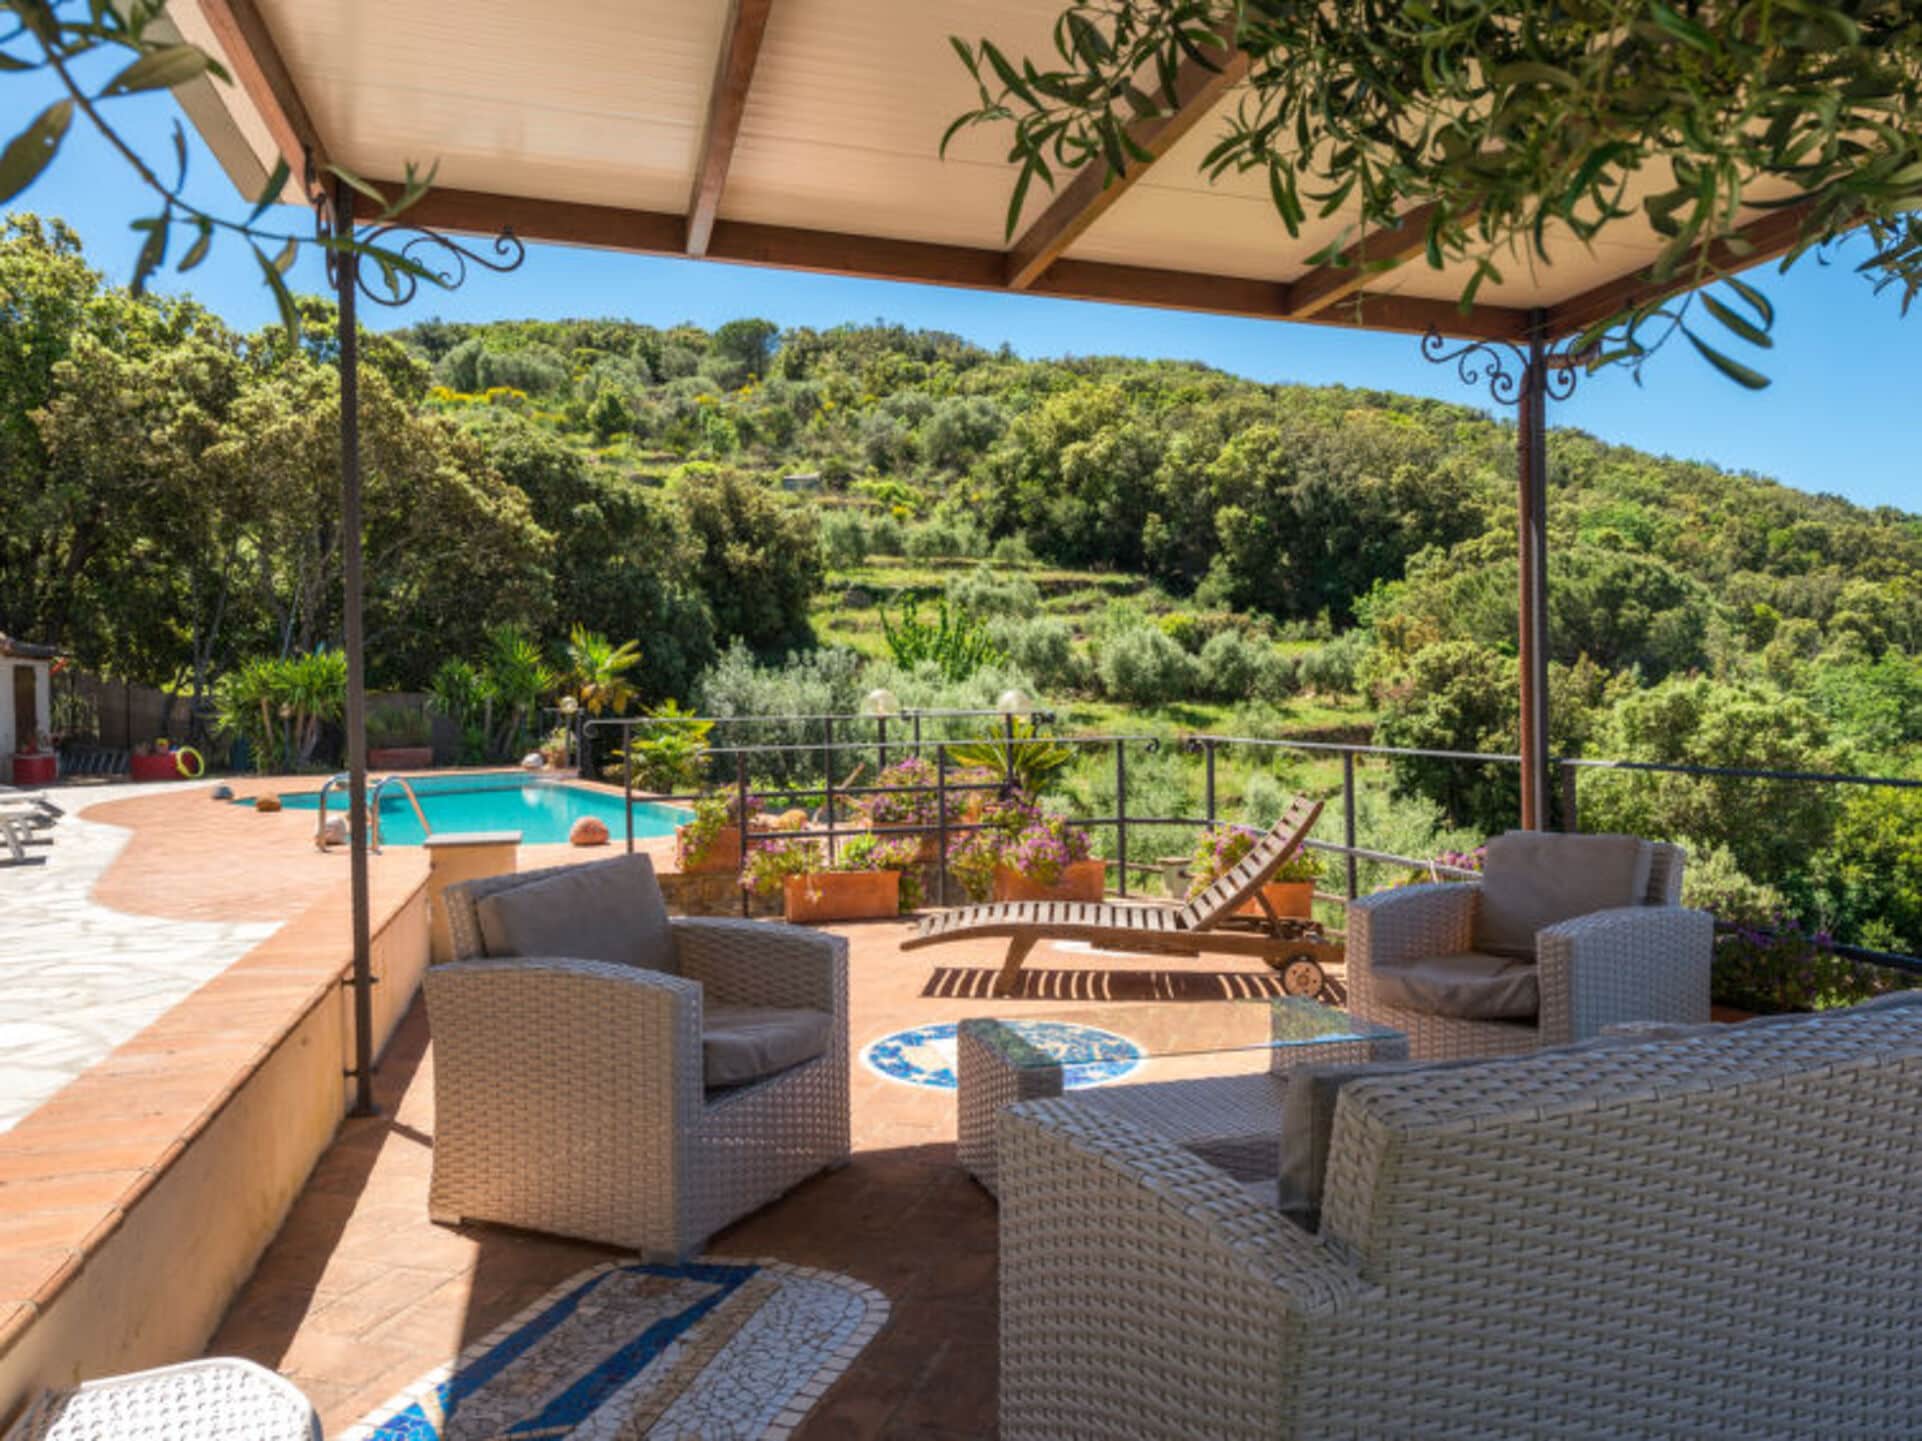 Property Image 2 - Property Manager Villa with First Class Amenities, Maremma Villa 1012